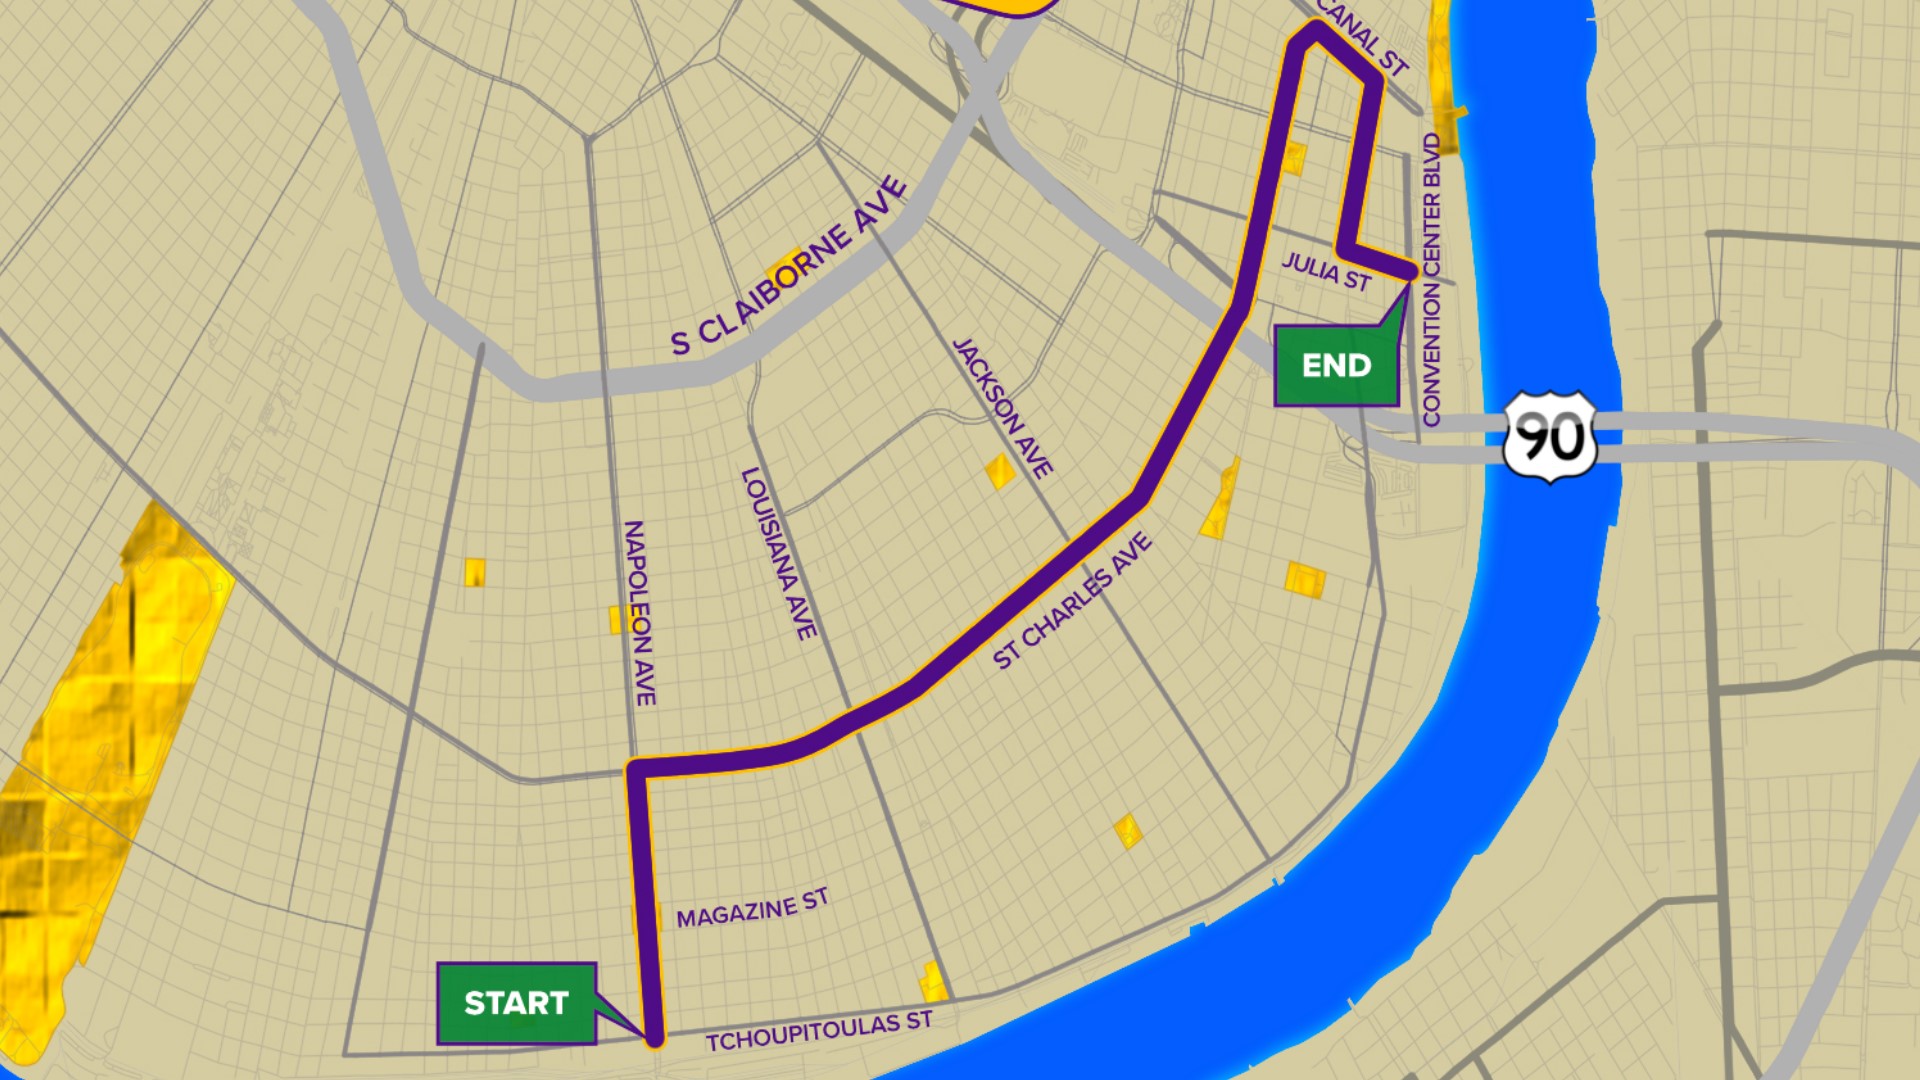 Krewe of Bacchus 2020 parade route